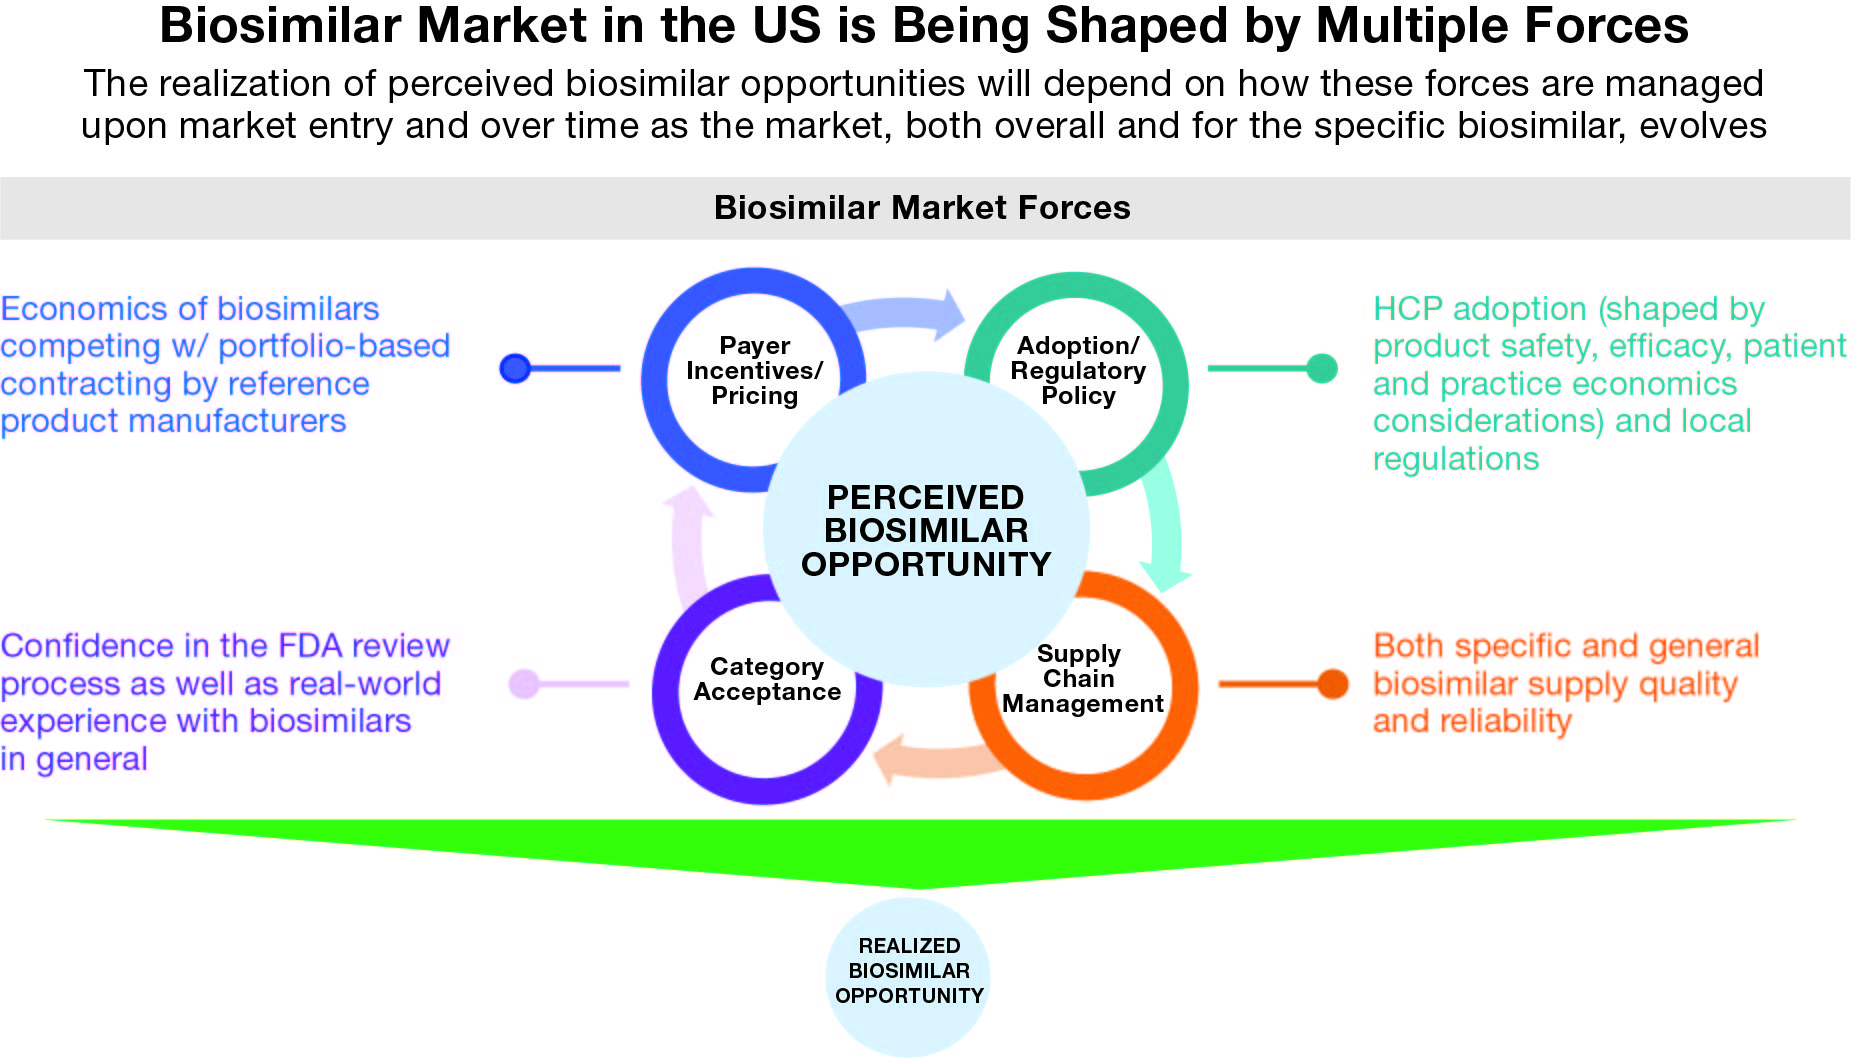 Biosimilar launches are being shaped by multiple forces